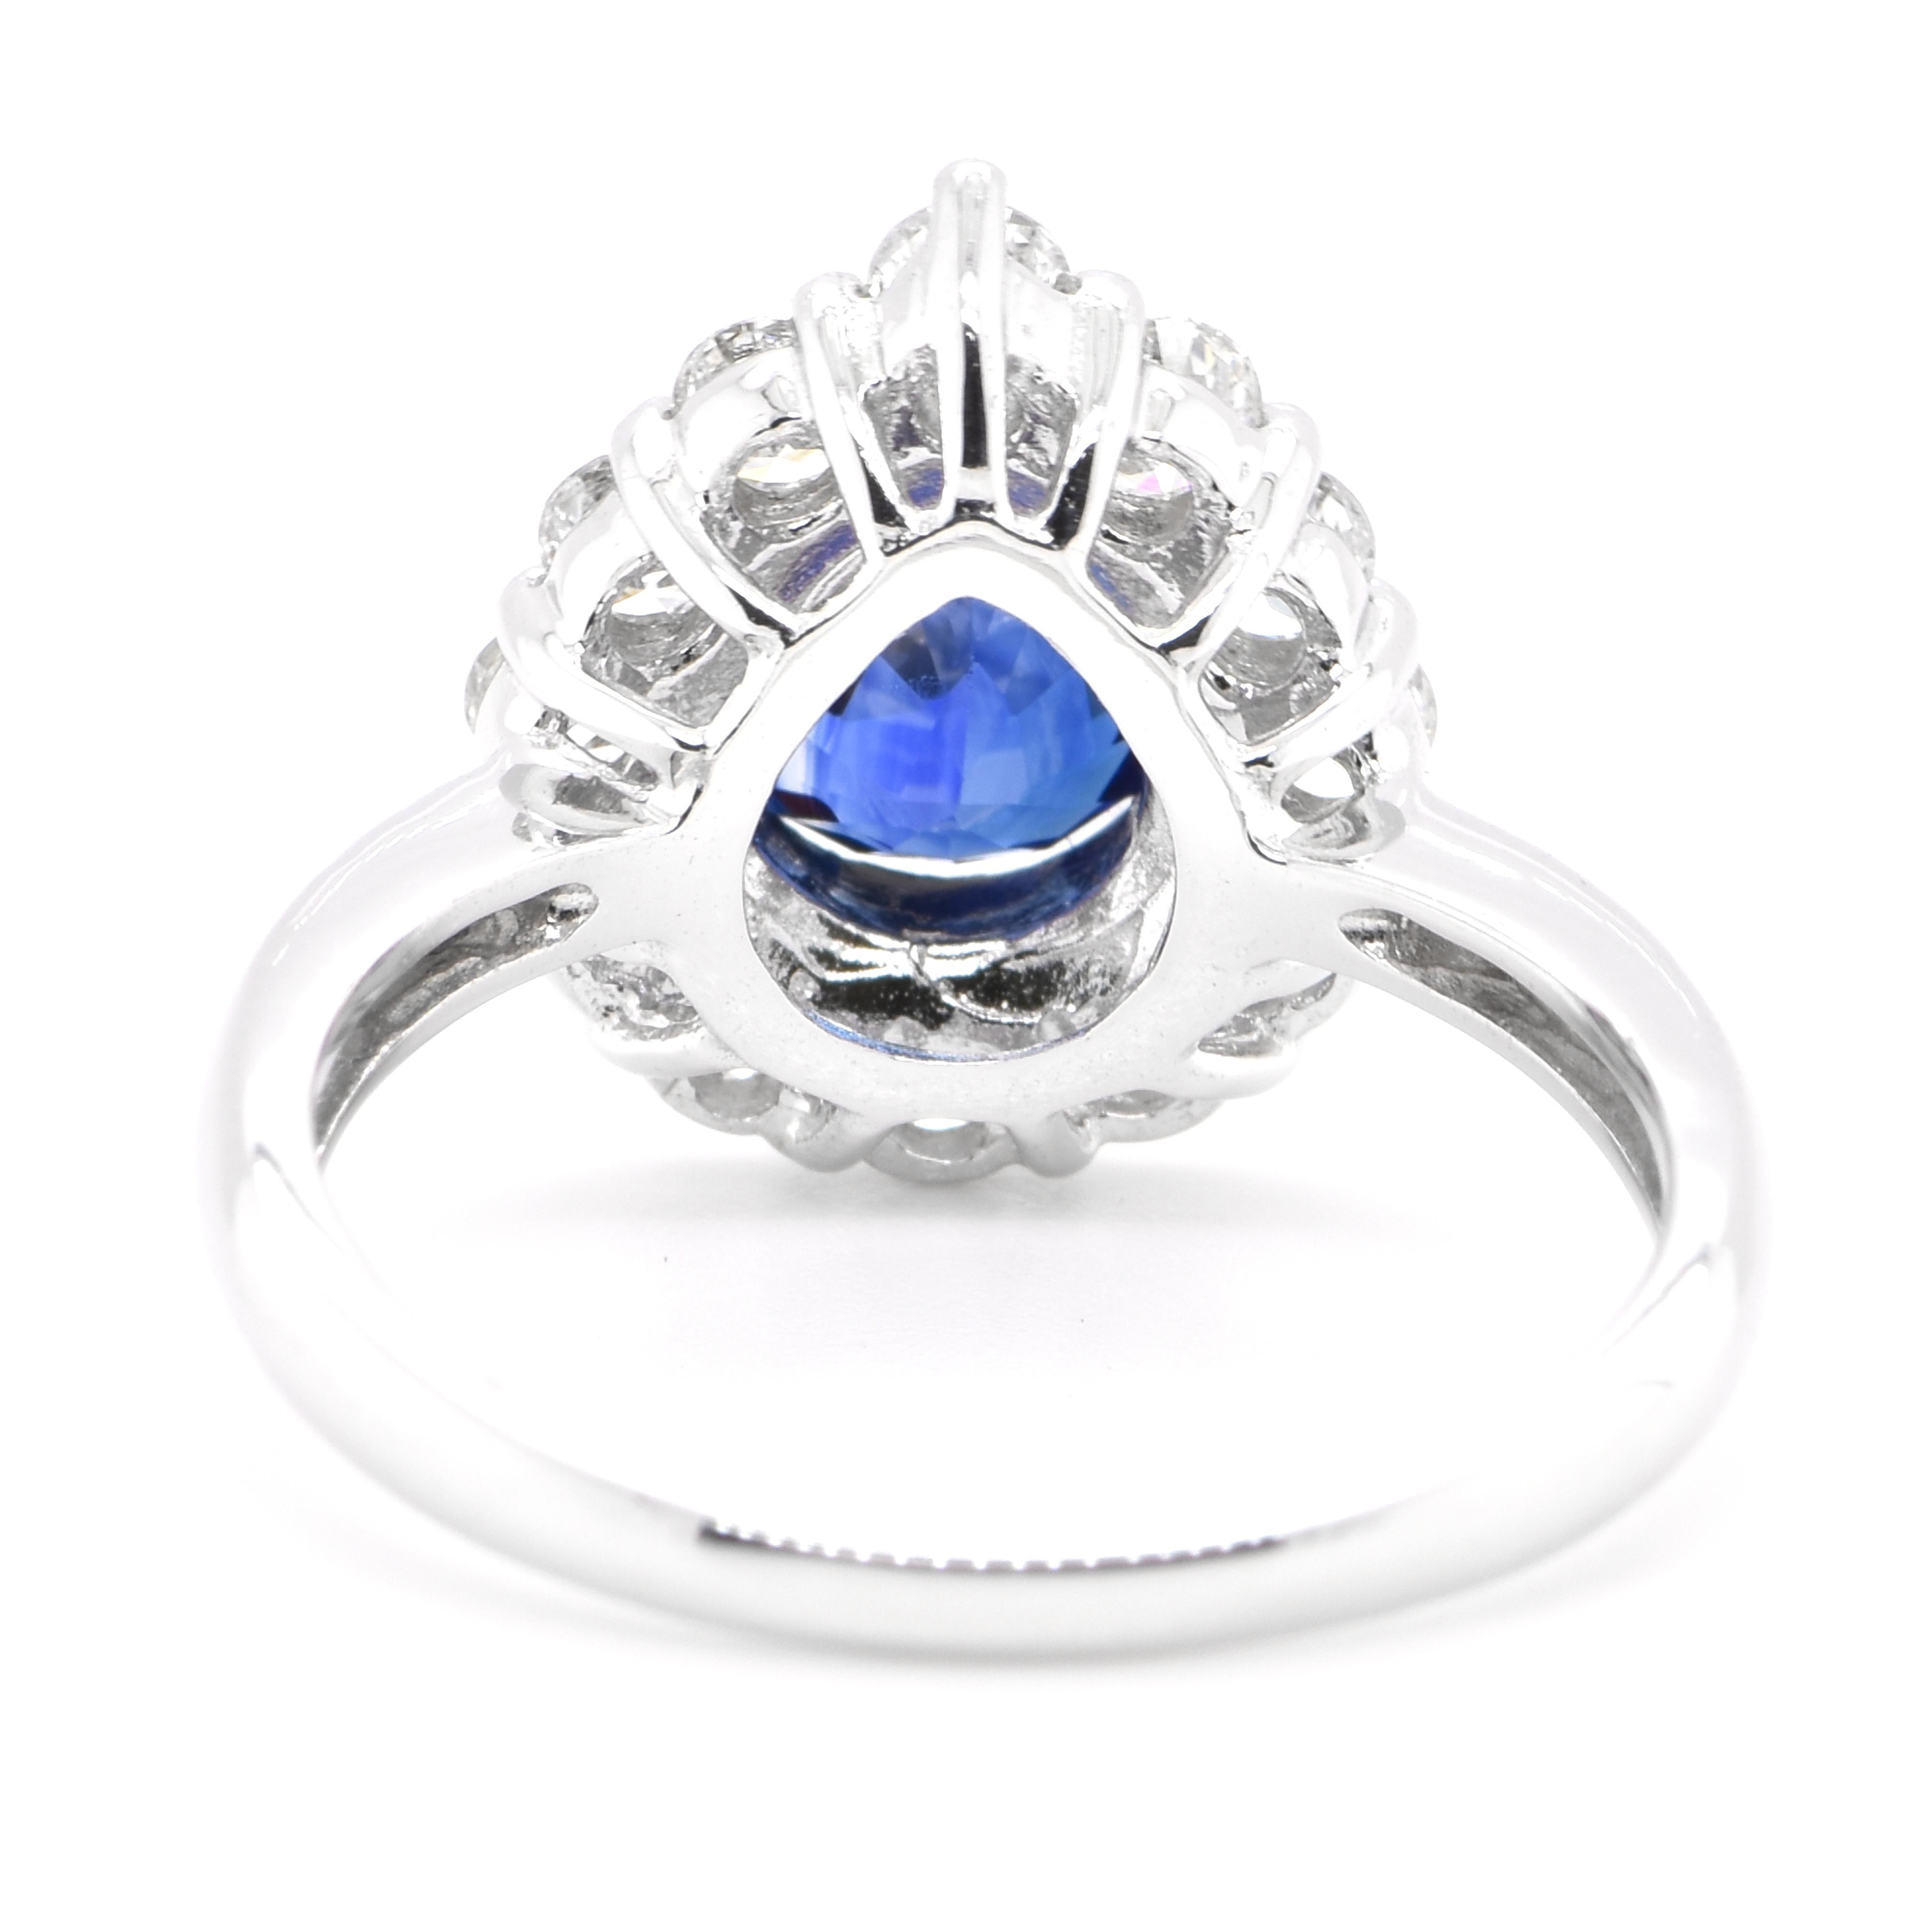 Women's GIA Certified 1.58 Carat Natural Ceylon Royal Blue Sapphire Ring Set in Platinum For Sale